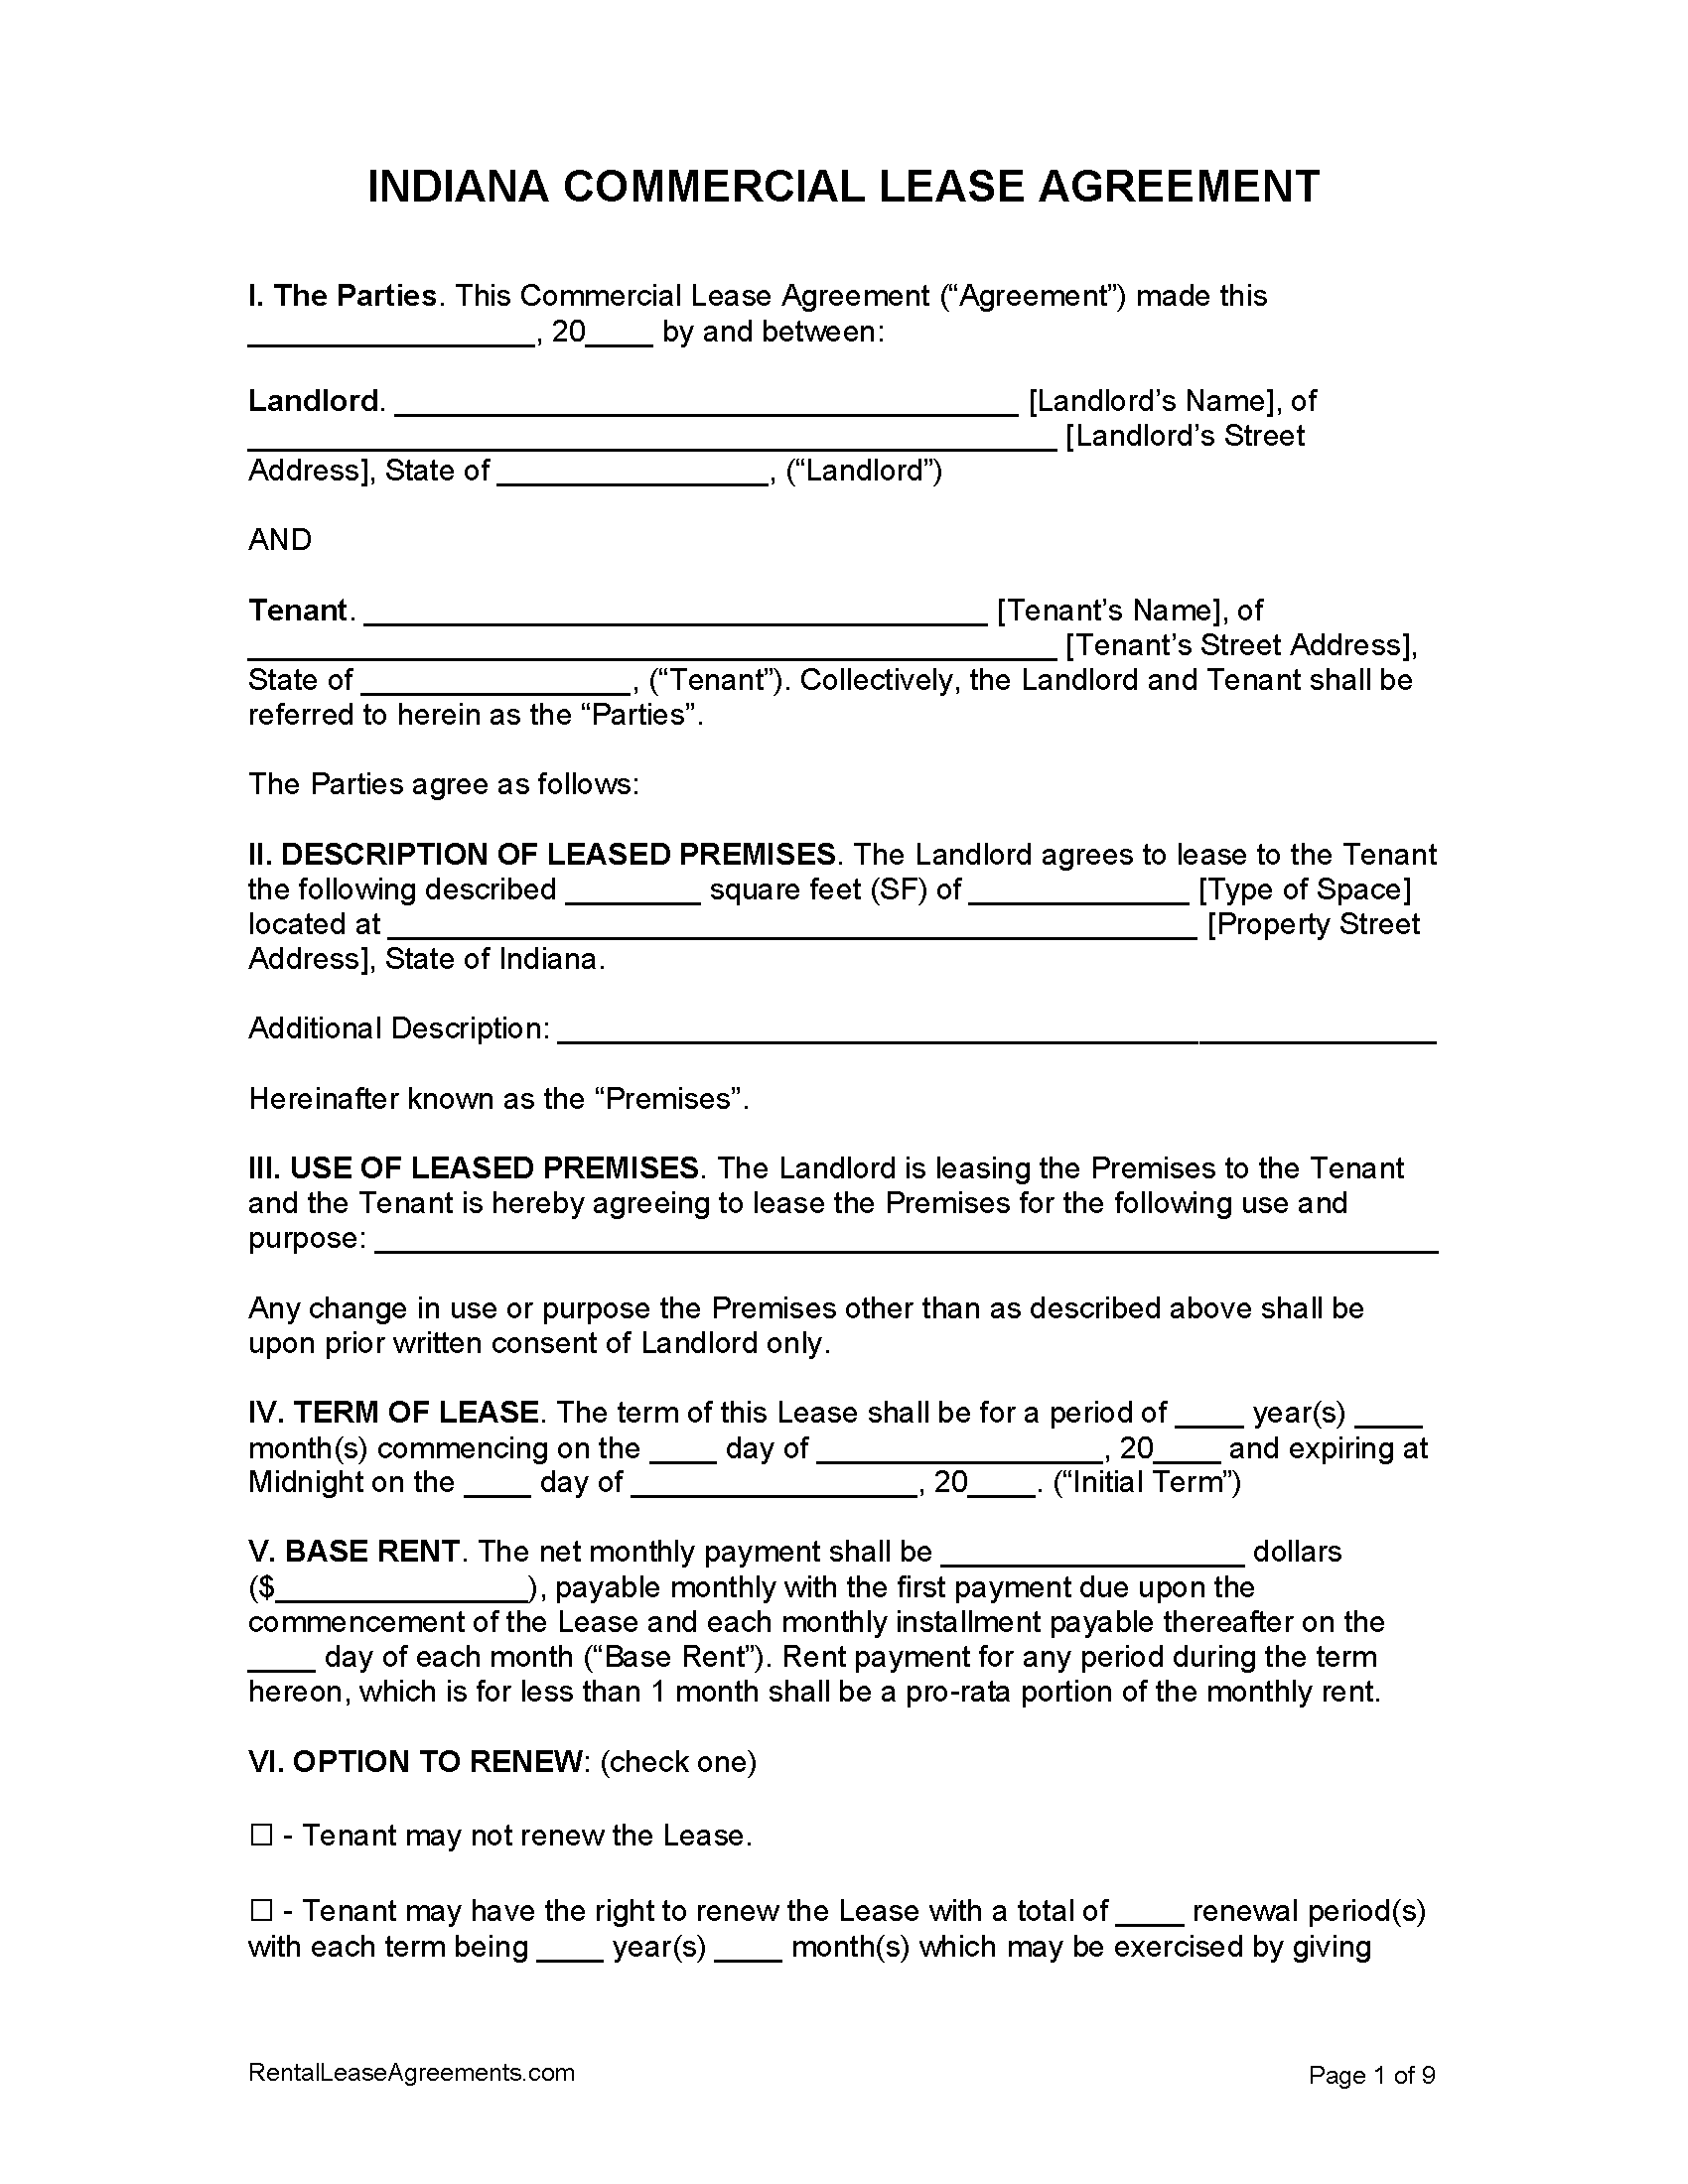 free indiana commercial lease agreement pdf ms word